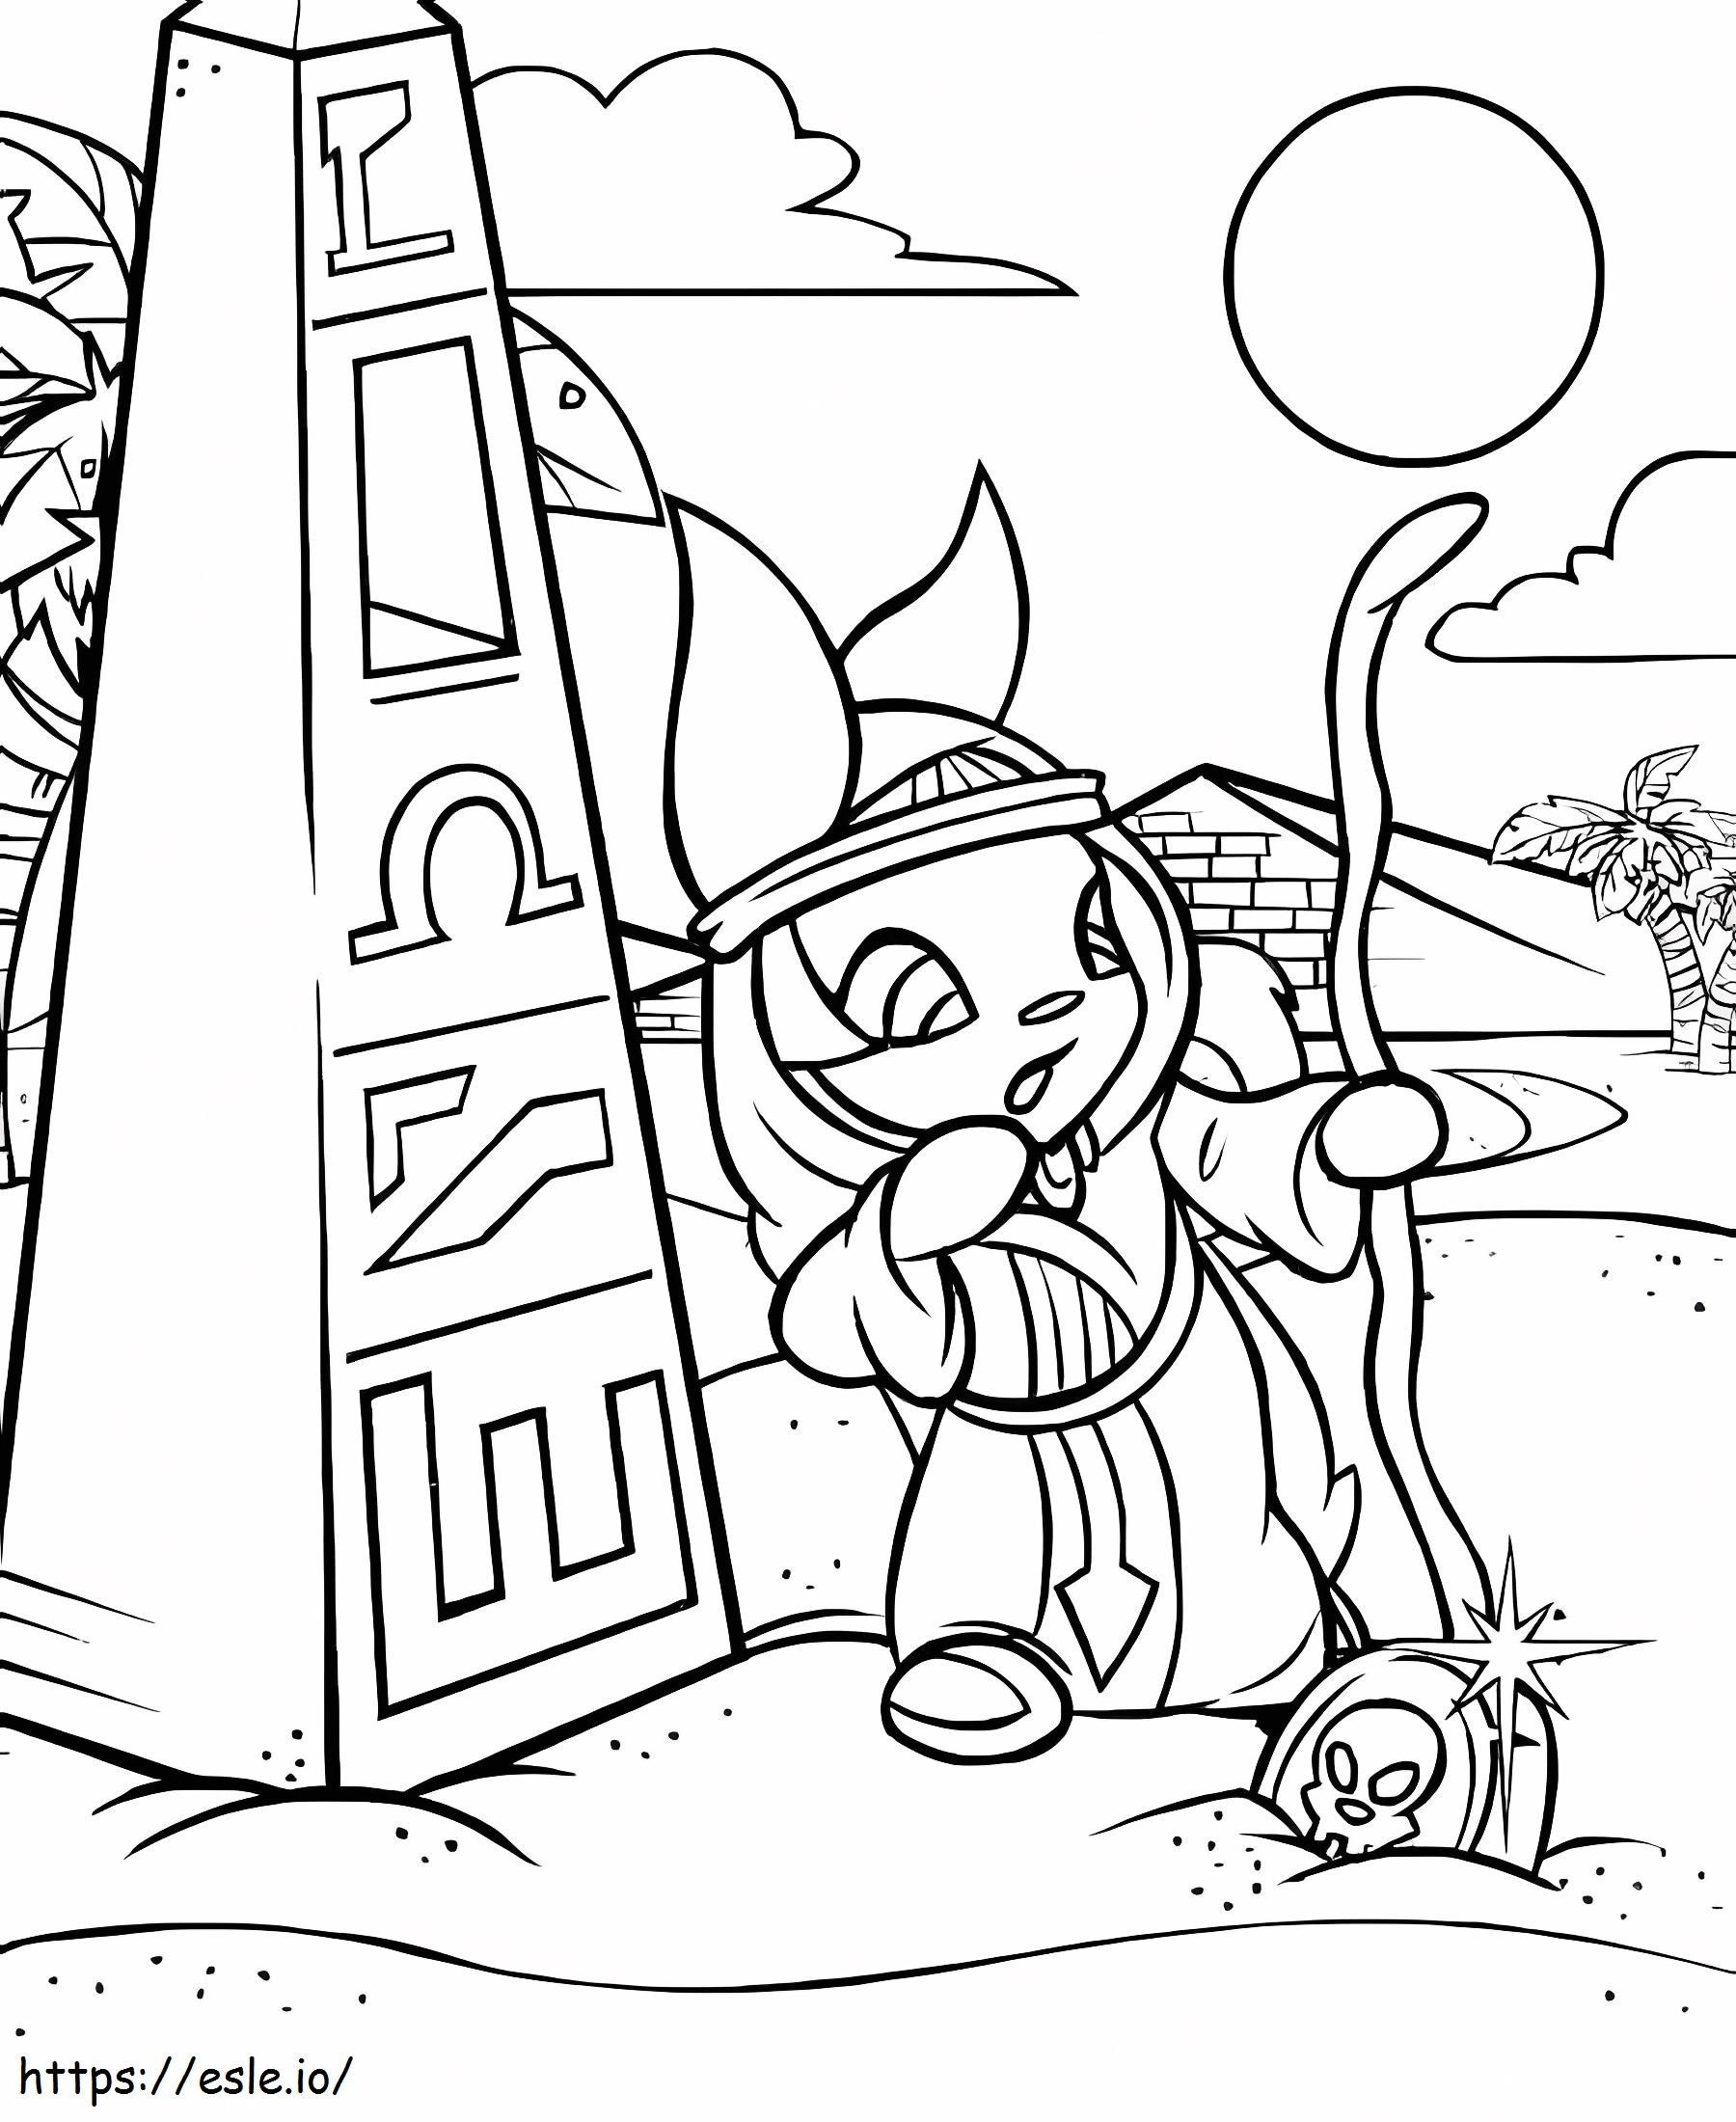 Neopets 27 coloring page